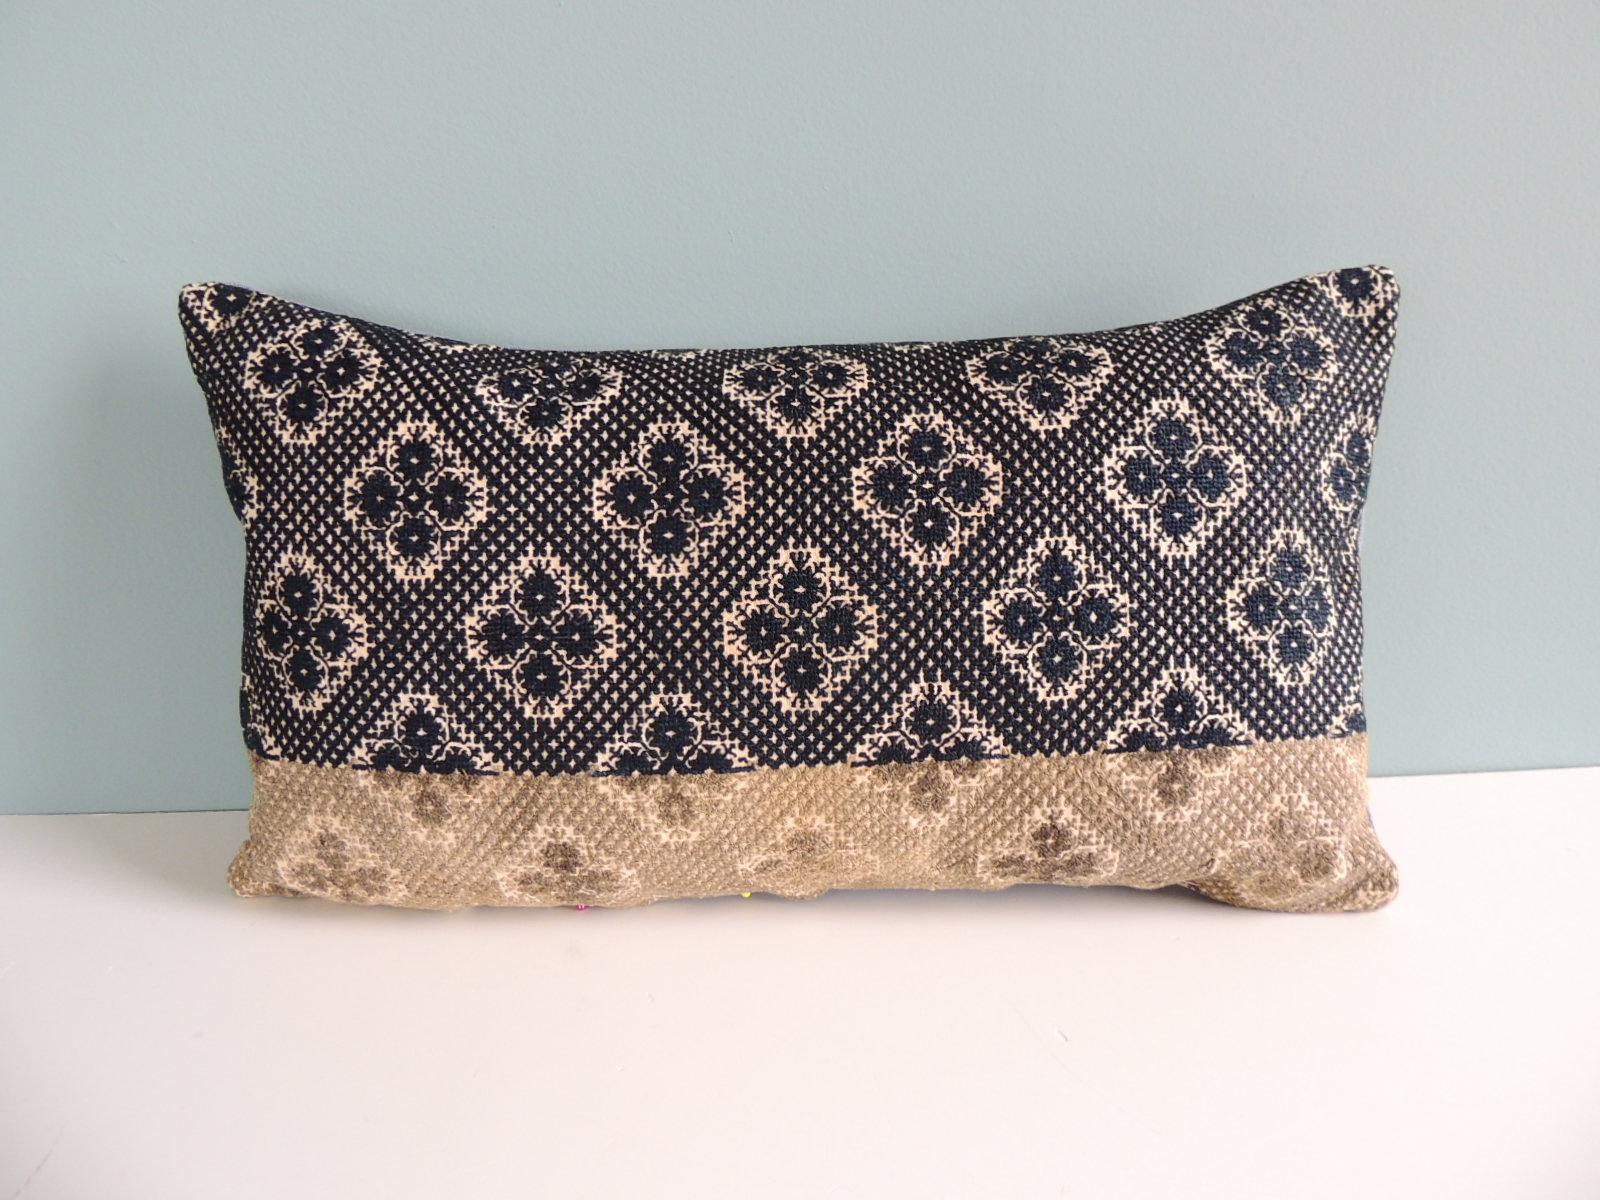 Antique black and grey ombre fez decorative lumbar pillow with blue antique linen backing.
Decorative pillow handcrafted and designed in the USA. 
Closure by stitch (no zipper closure) with custom-made feather / down pillow insert.
Size: 11